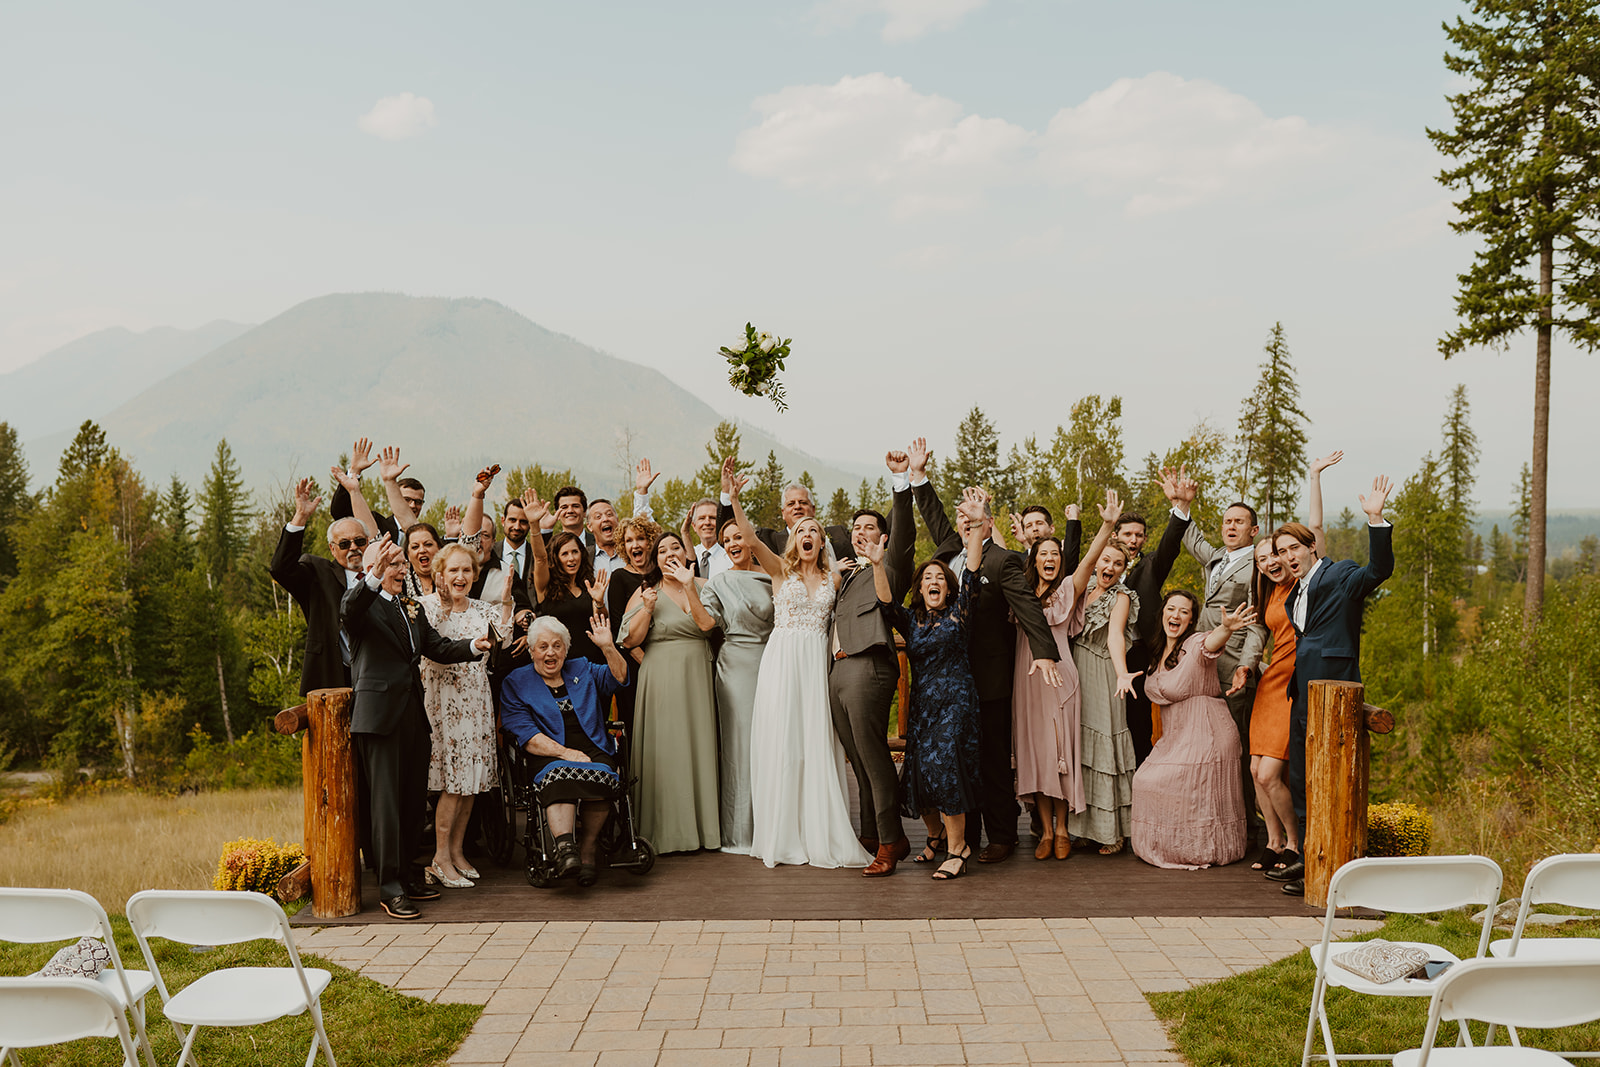 Taylor and Matthew surrounded by their family celebrating after their wedding at Glacier Raft Company.